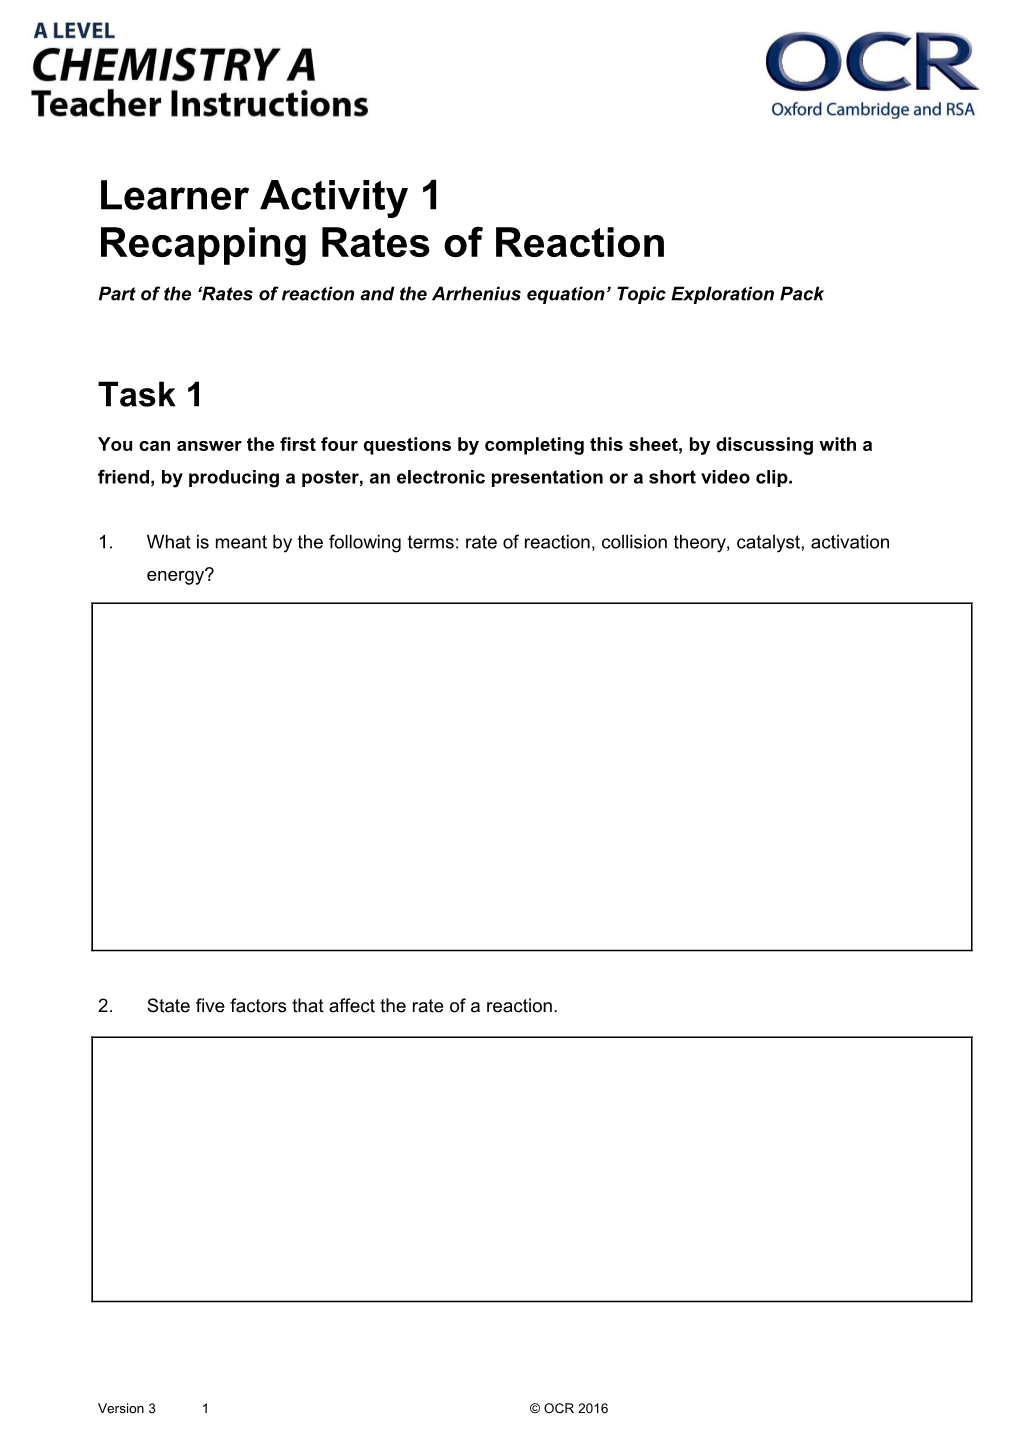 A Level Chemistry a Topic Exploration Pack (Rates of Reaction)